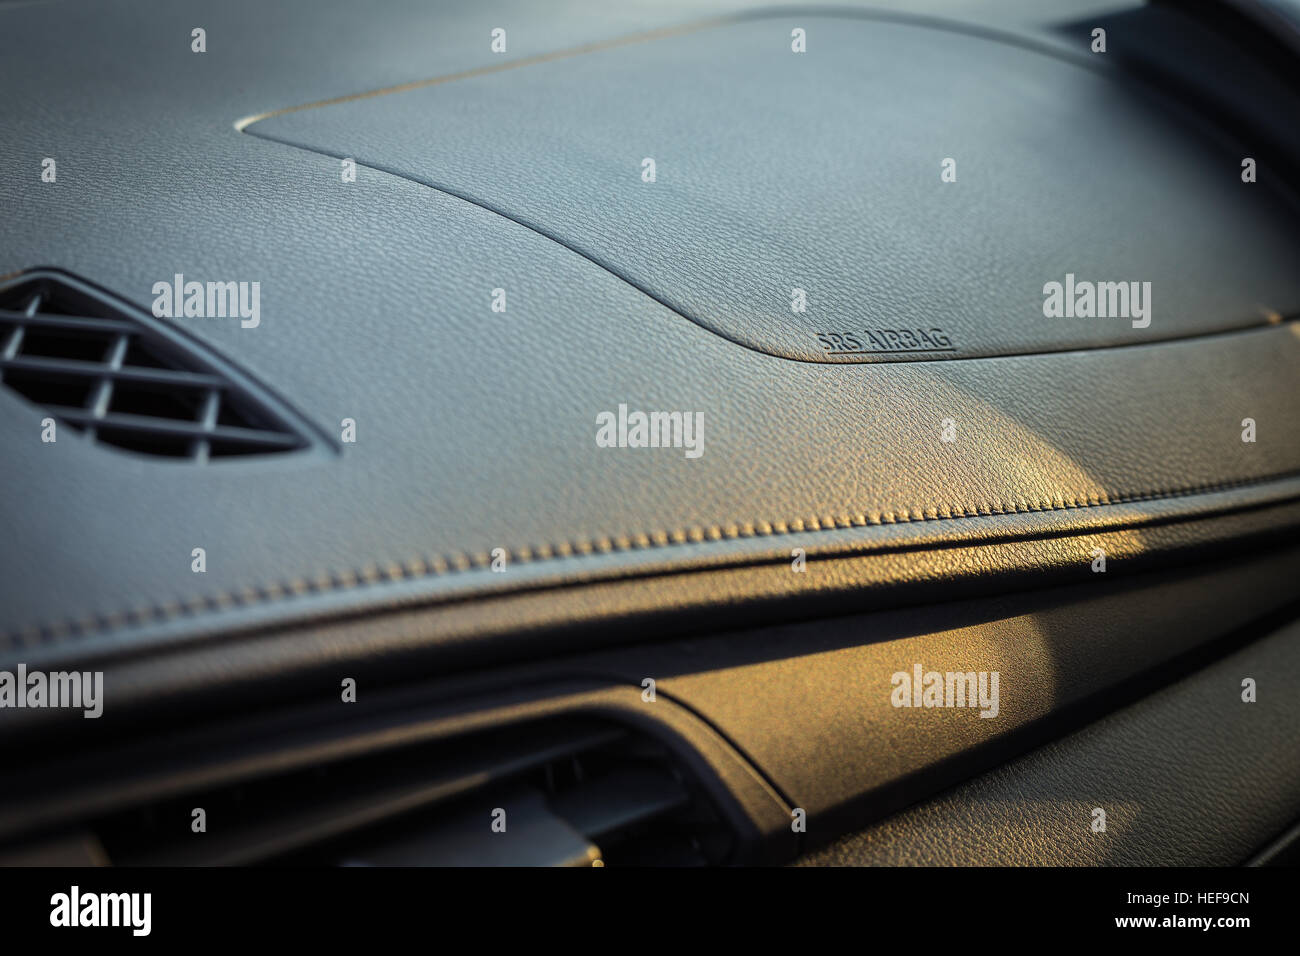 Detail of new modern car interior, Focus on airbag Stock Photo